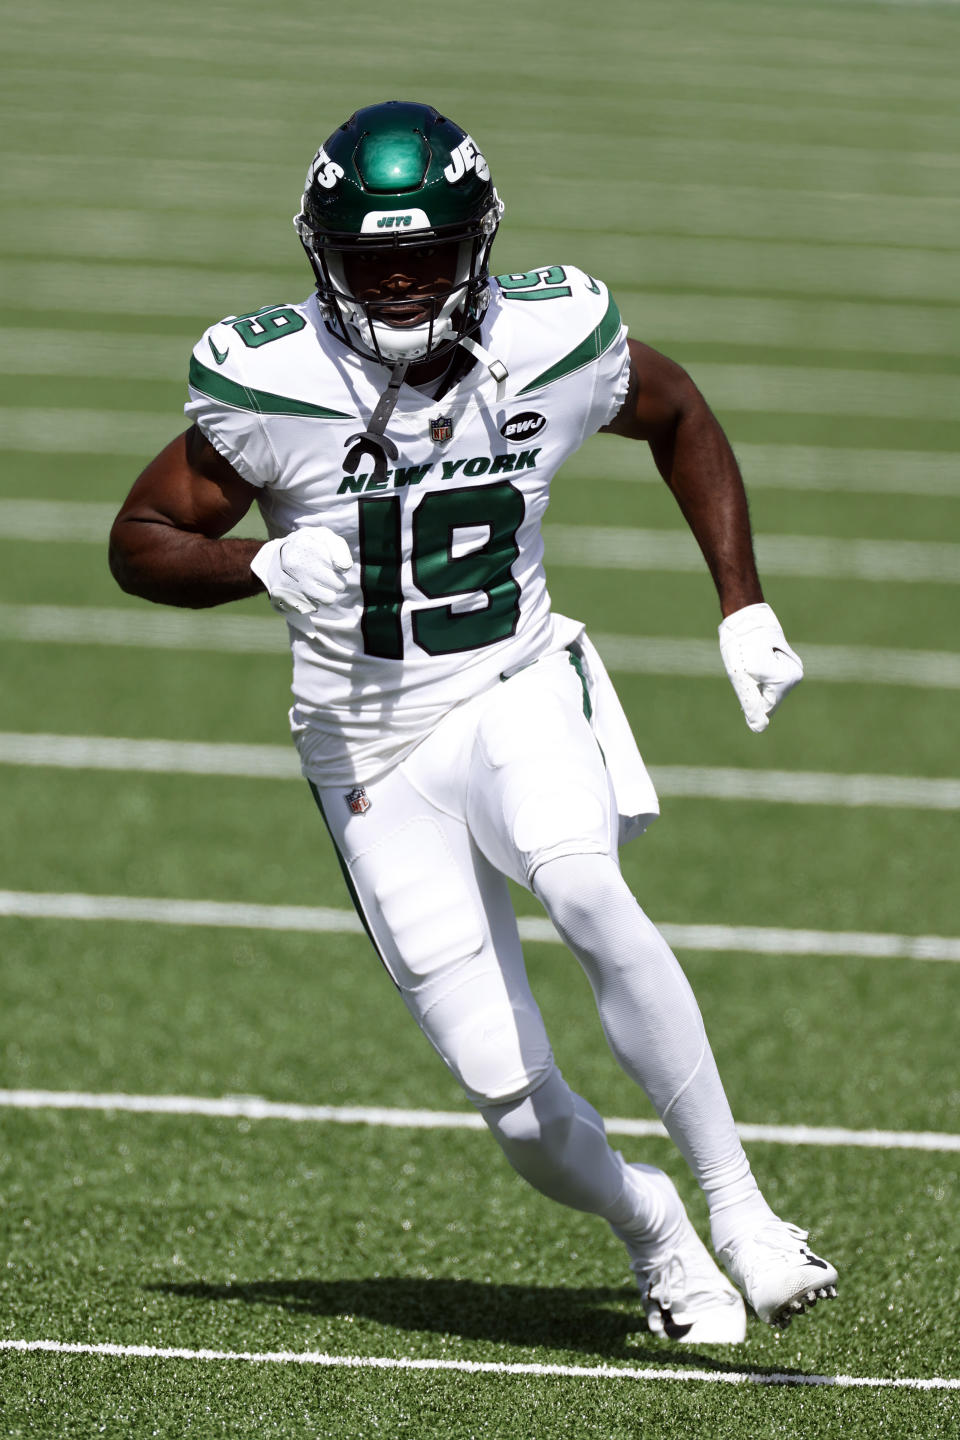 File-New York Jets wide receiver Breshad Perriman (19) prior to an NFL football game against the San Francisco 49ers, Sunday, Sept. 20, 2020, in East Rutherford, N.J. New York Jets wide receivers Perriman and Jamison Crowder sat out practice Wednesday, Sept. 23, 2020, with injuries, and they could miss the team's game at Indianapolis on Sunday.(AP Photo/Adam Hunger, File)